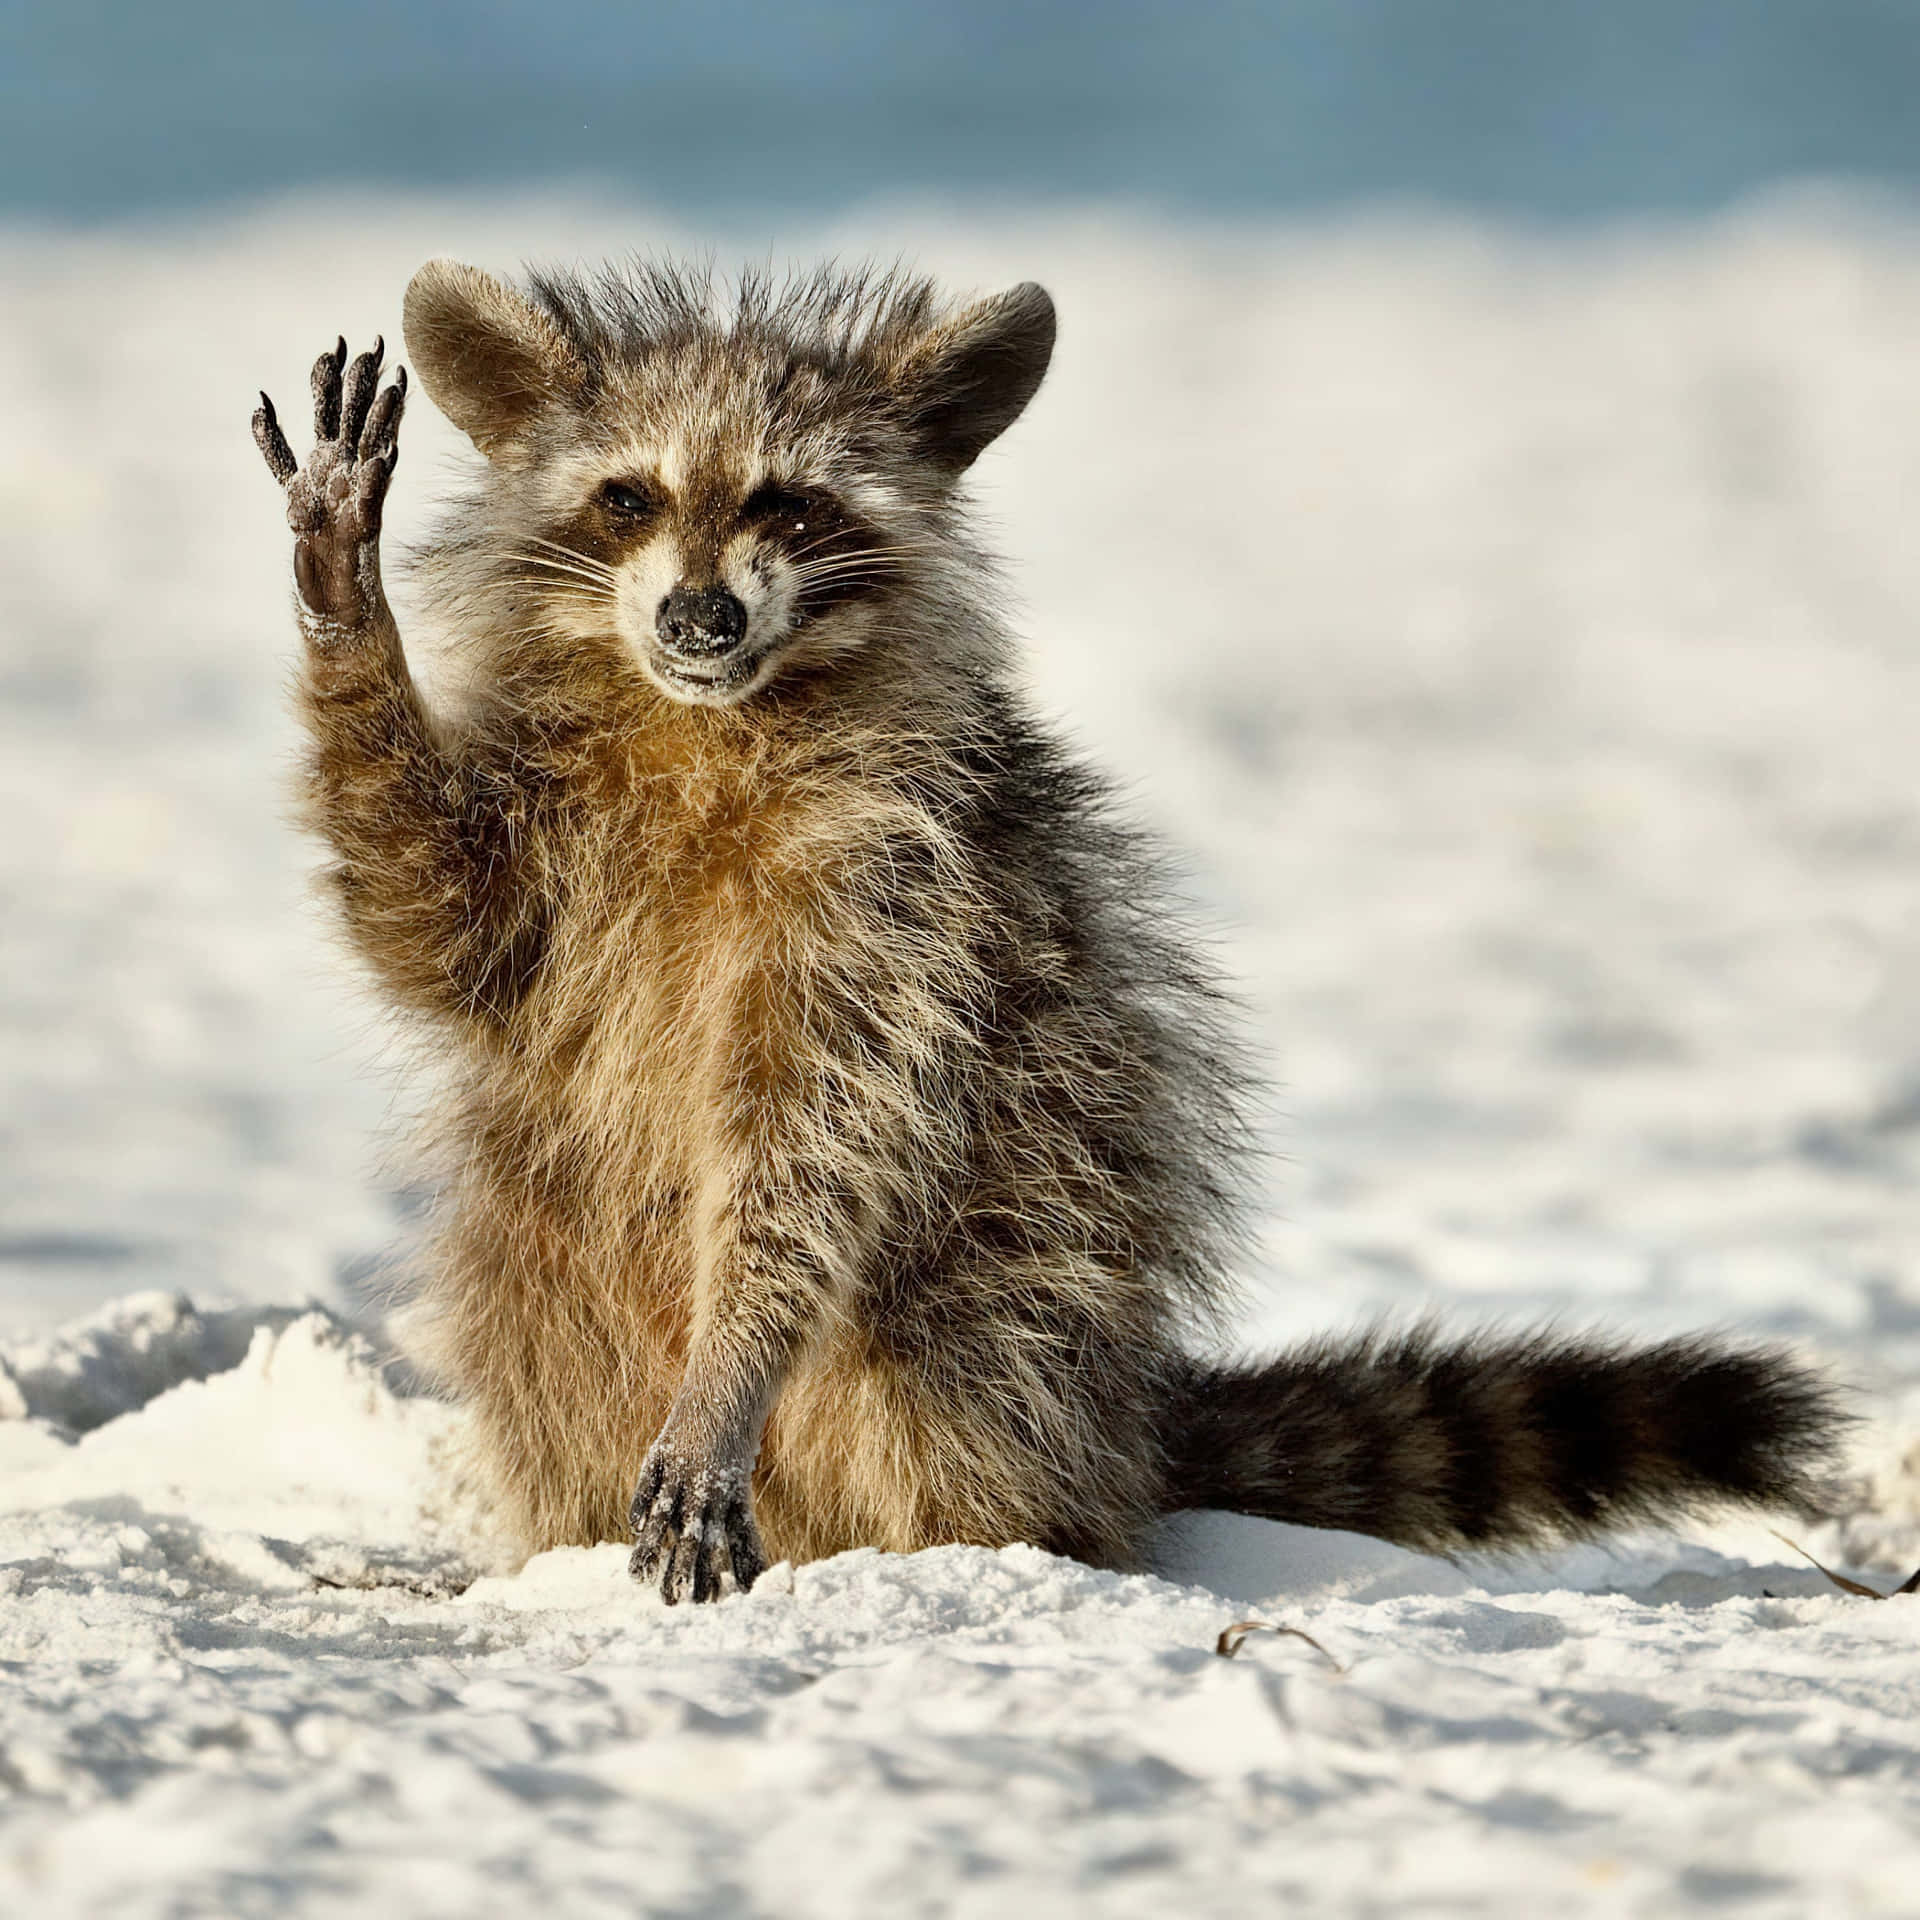 A Raccoon Is Sitting On The Beach And Waving